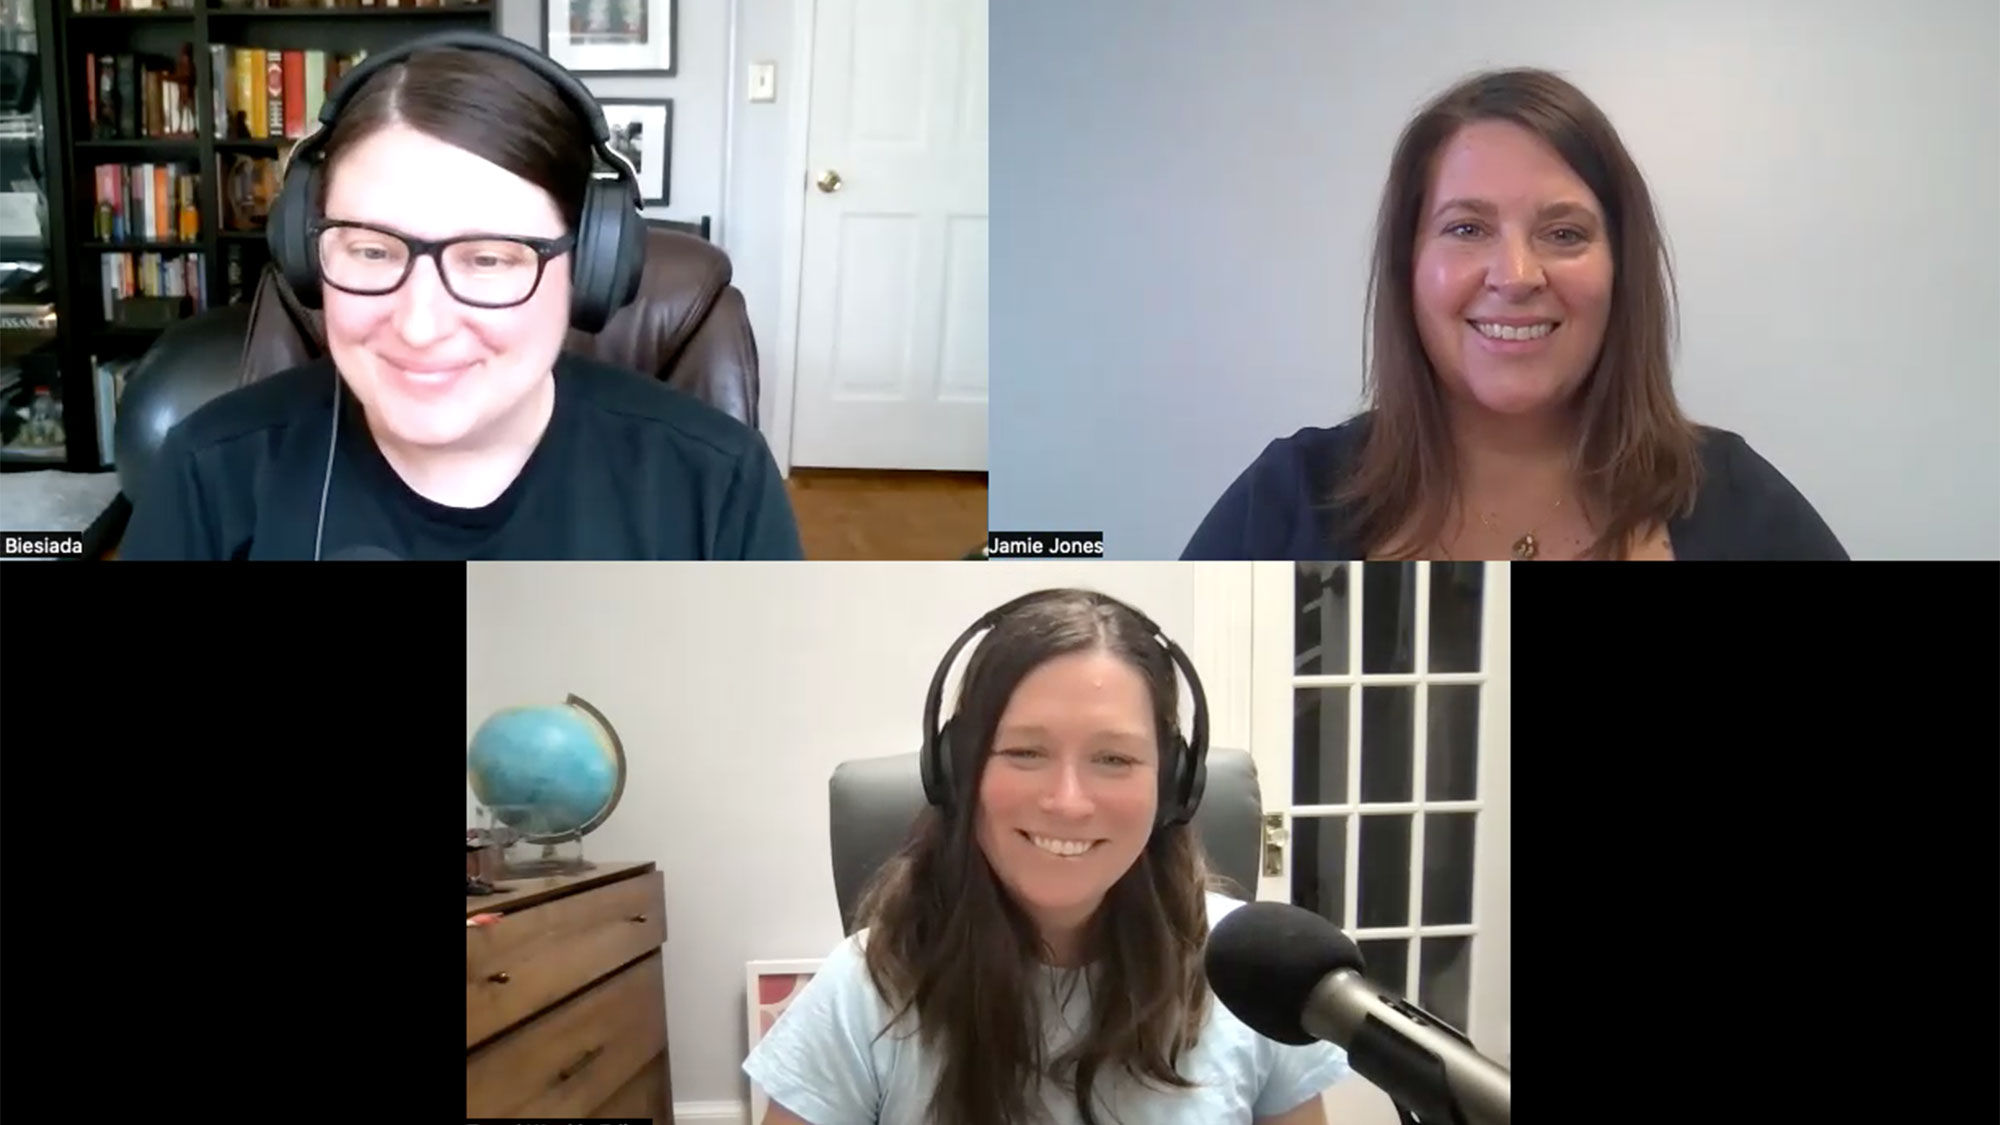 Clockwise from top left: Jamie Biesiada of Travel Weekly, Jamie Jones of WhirlAway Travel and Rebecca Tobin of Travel Weekly on the Folo by Travel Weekly podcast episode about fees.